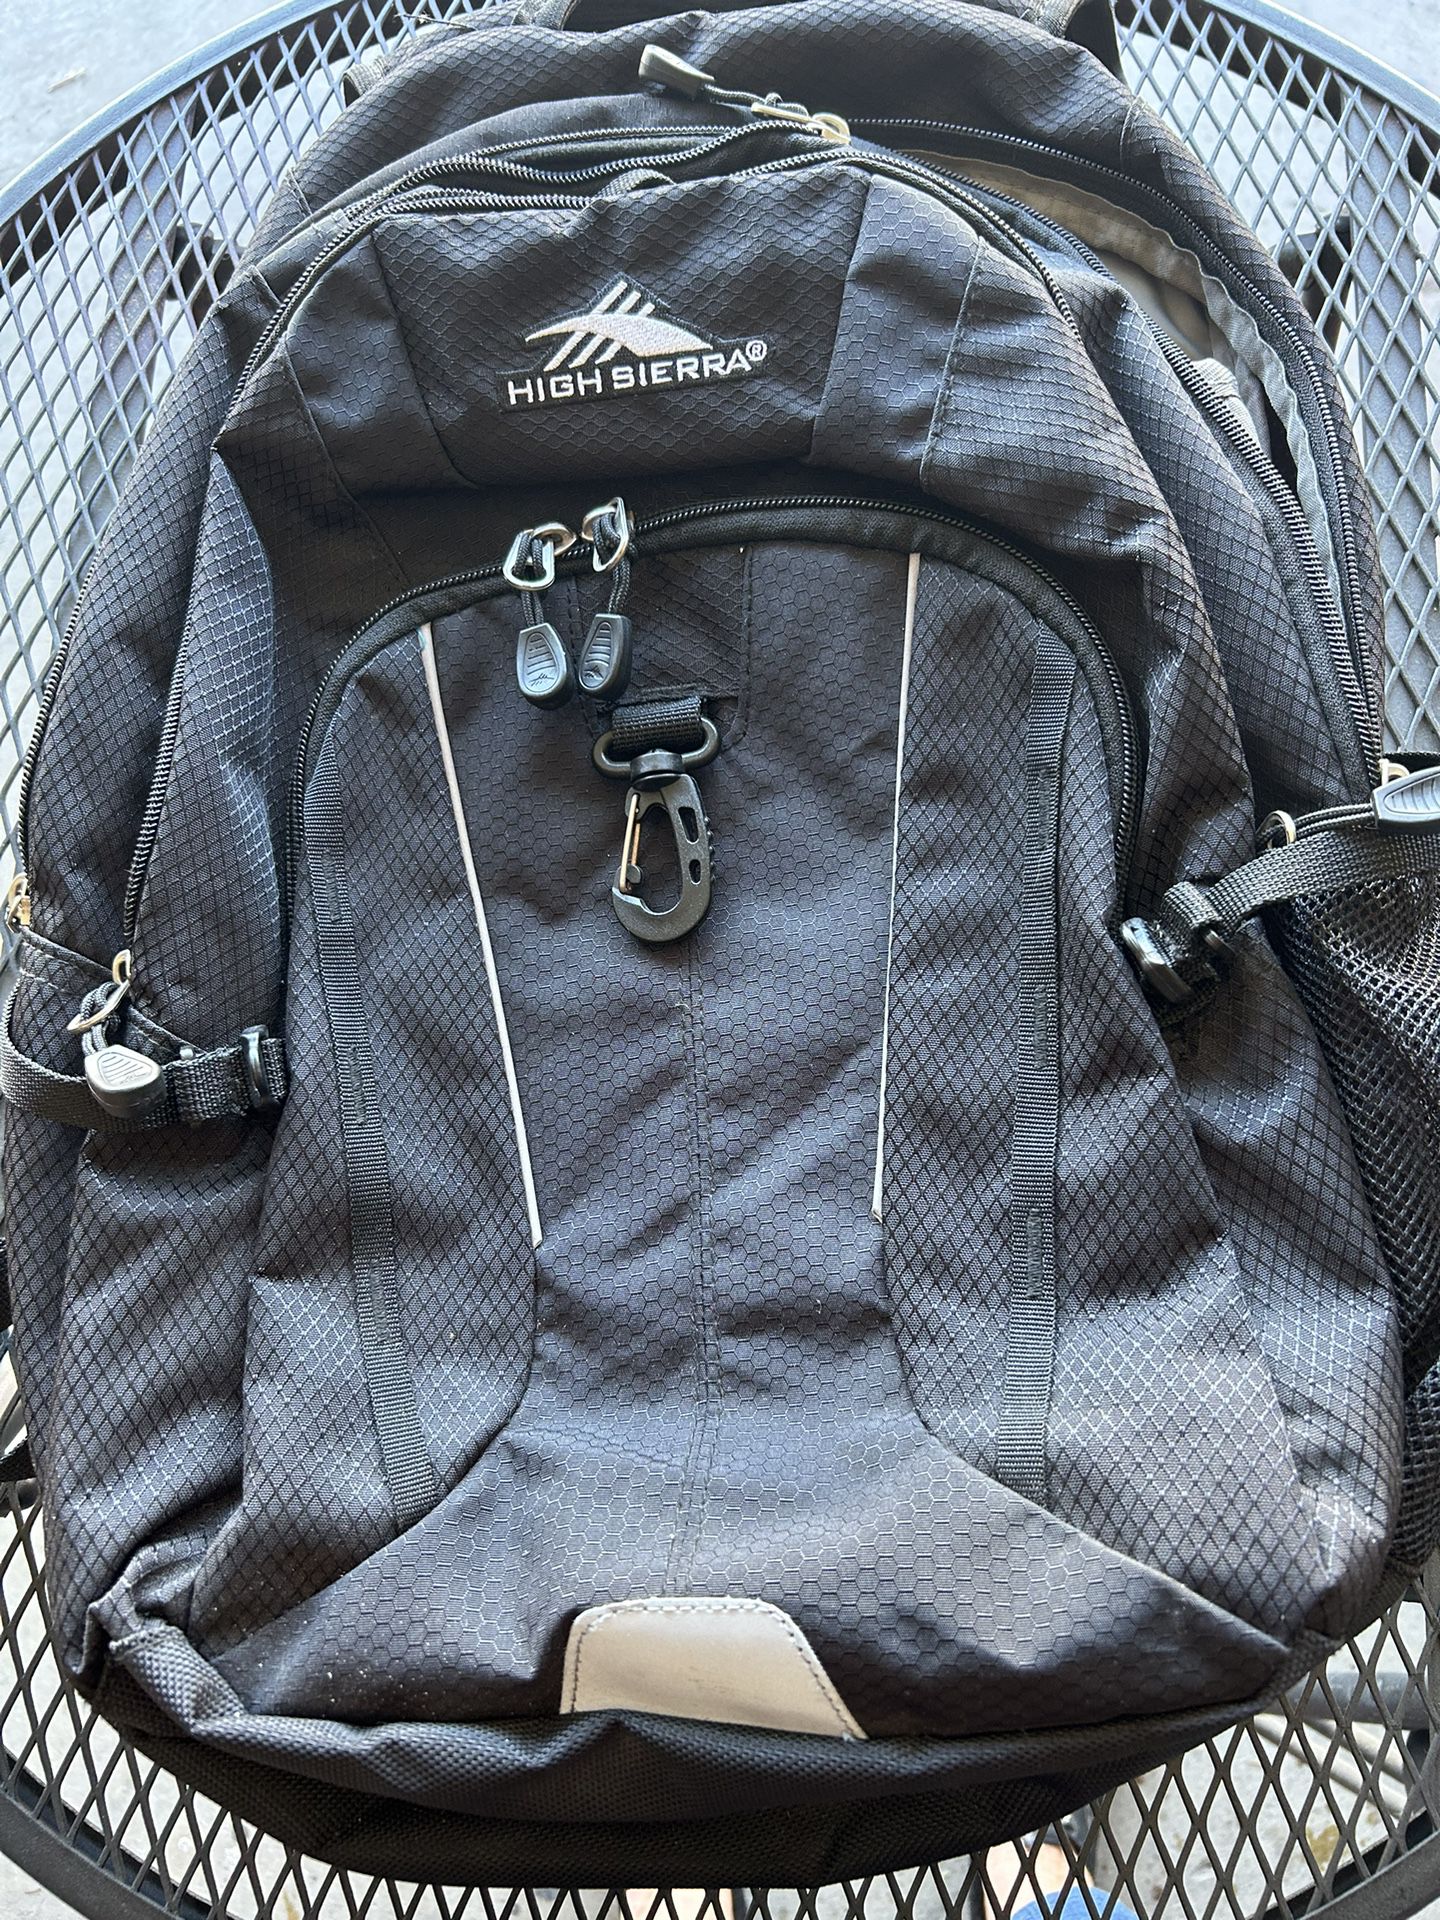 High Sierra  Backpack Space For Computer. New Without Tag    1 Mesh Bottle Holders 